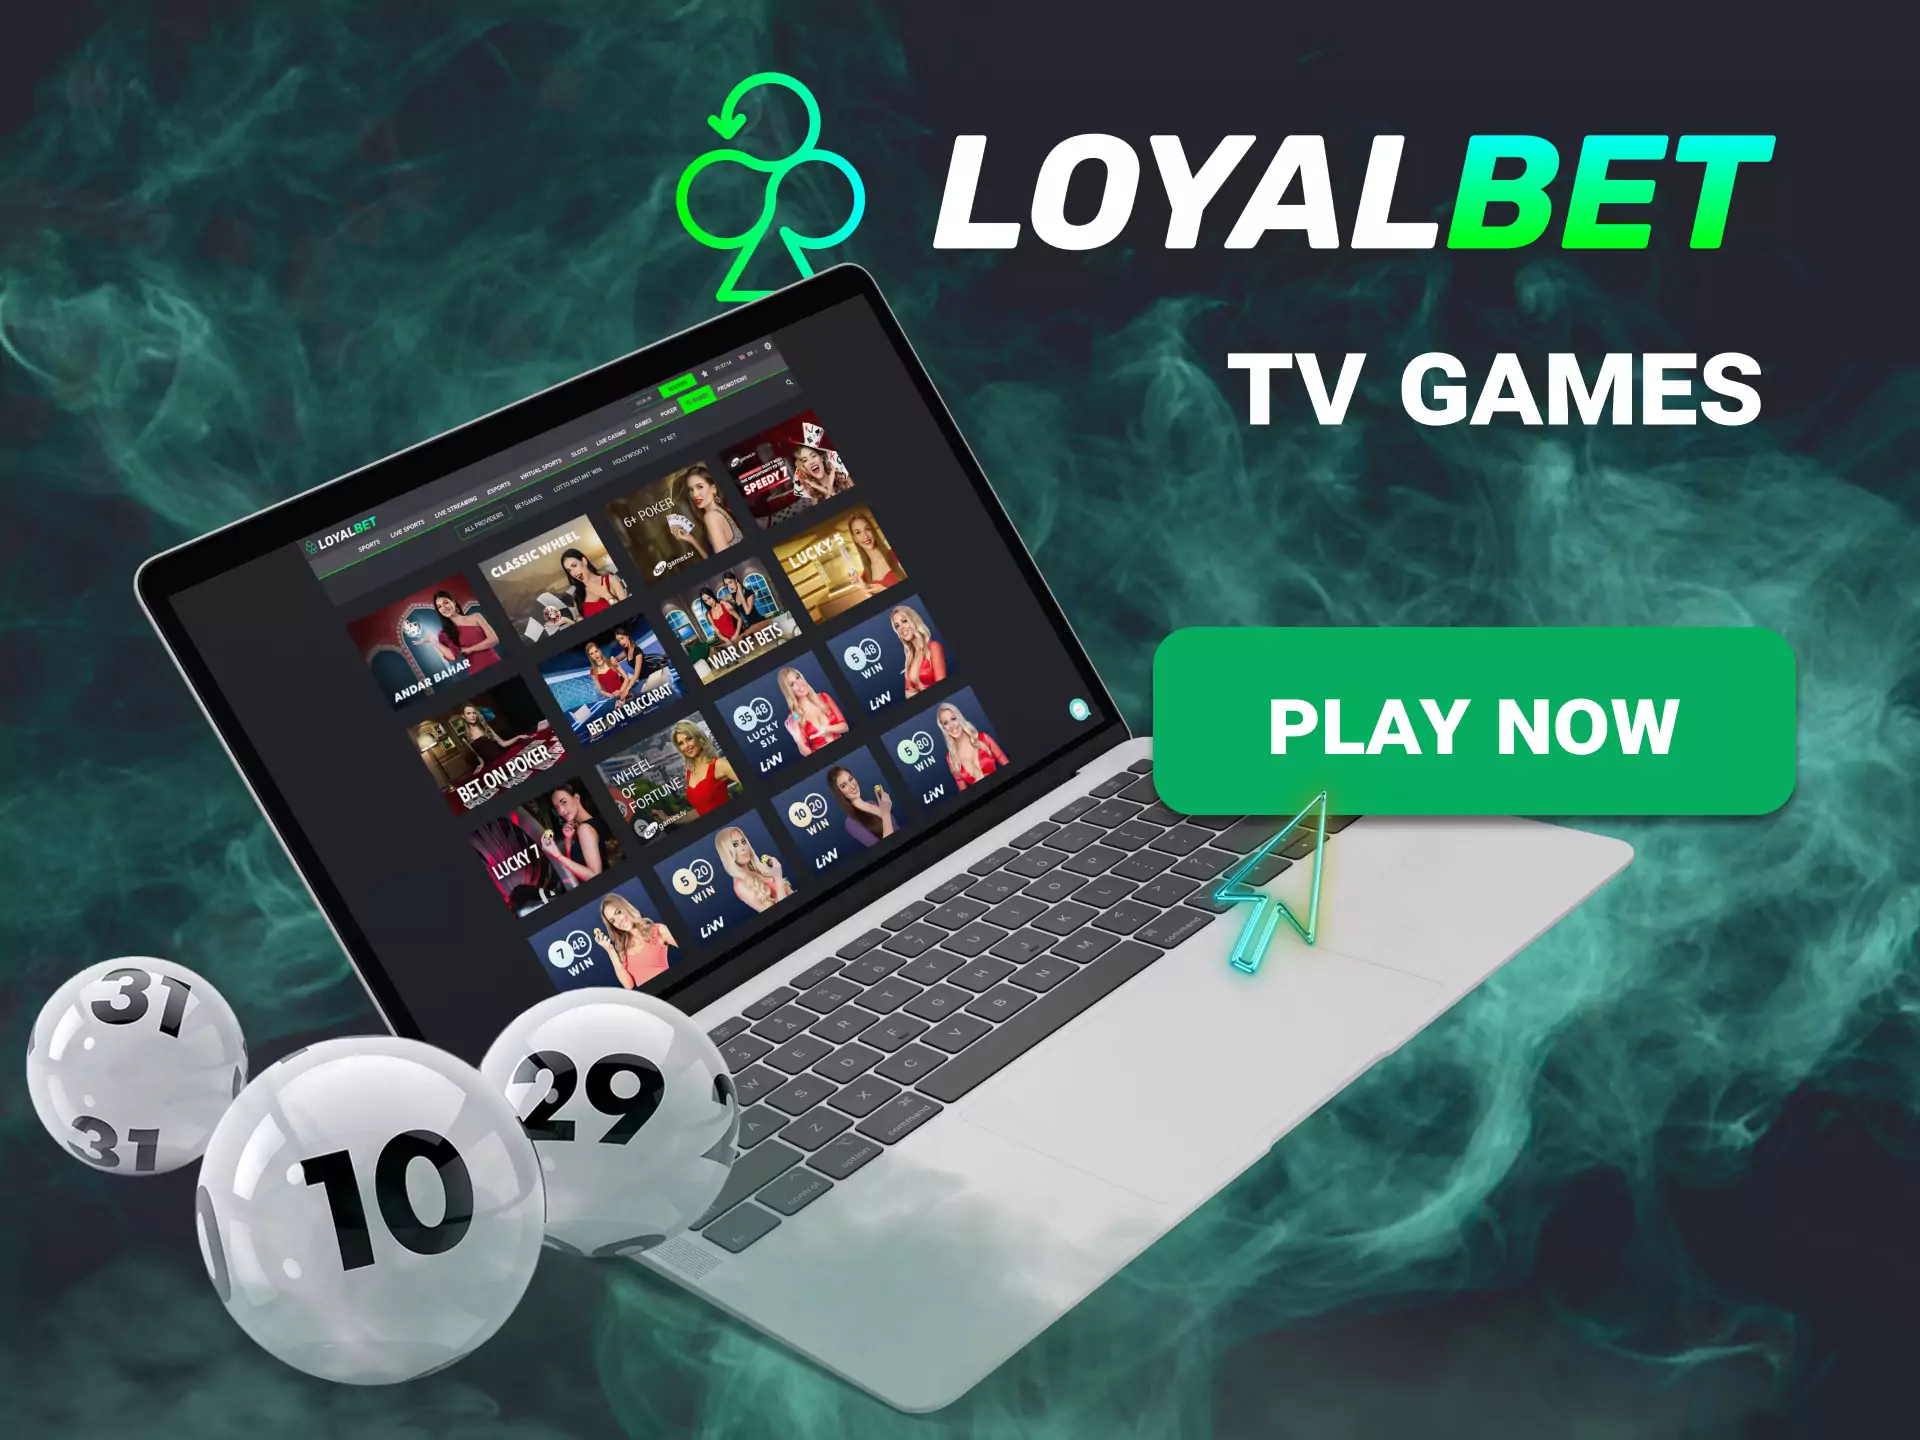 Besides betting and casino entertainment, you can enjoy TV games on Loyalbet.